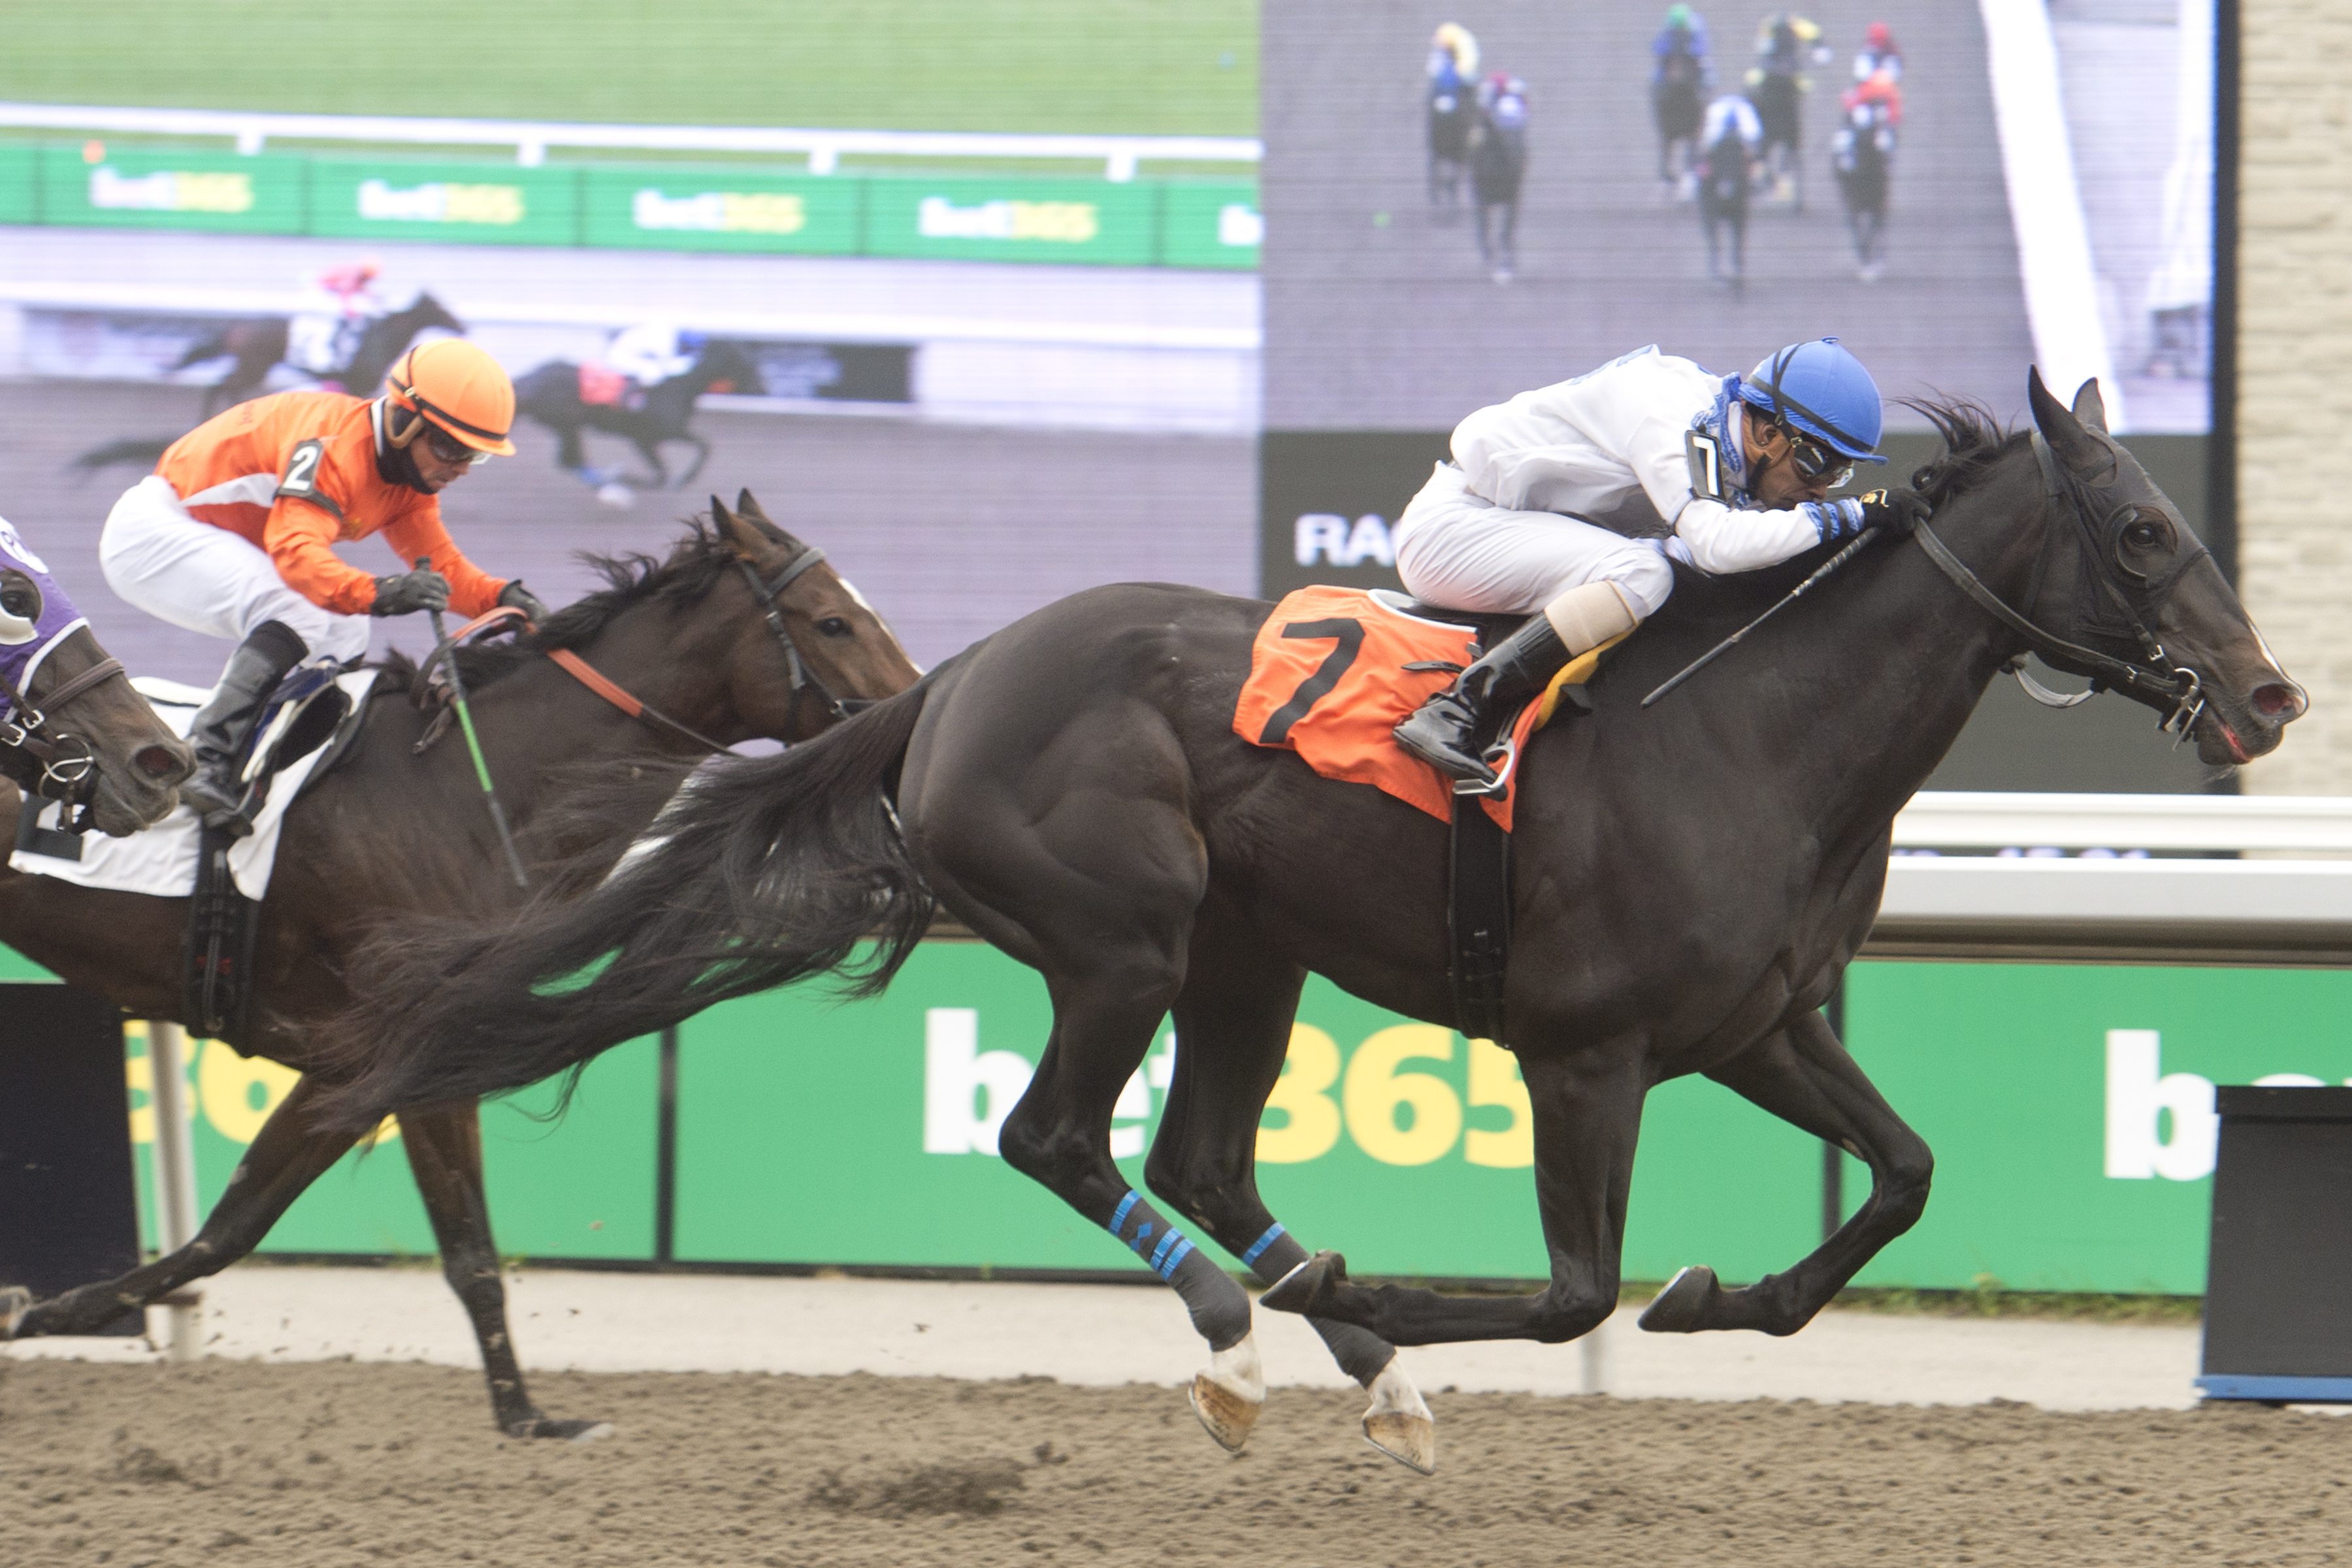 Heritage Series To Conclude This Friday At Woodbine